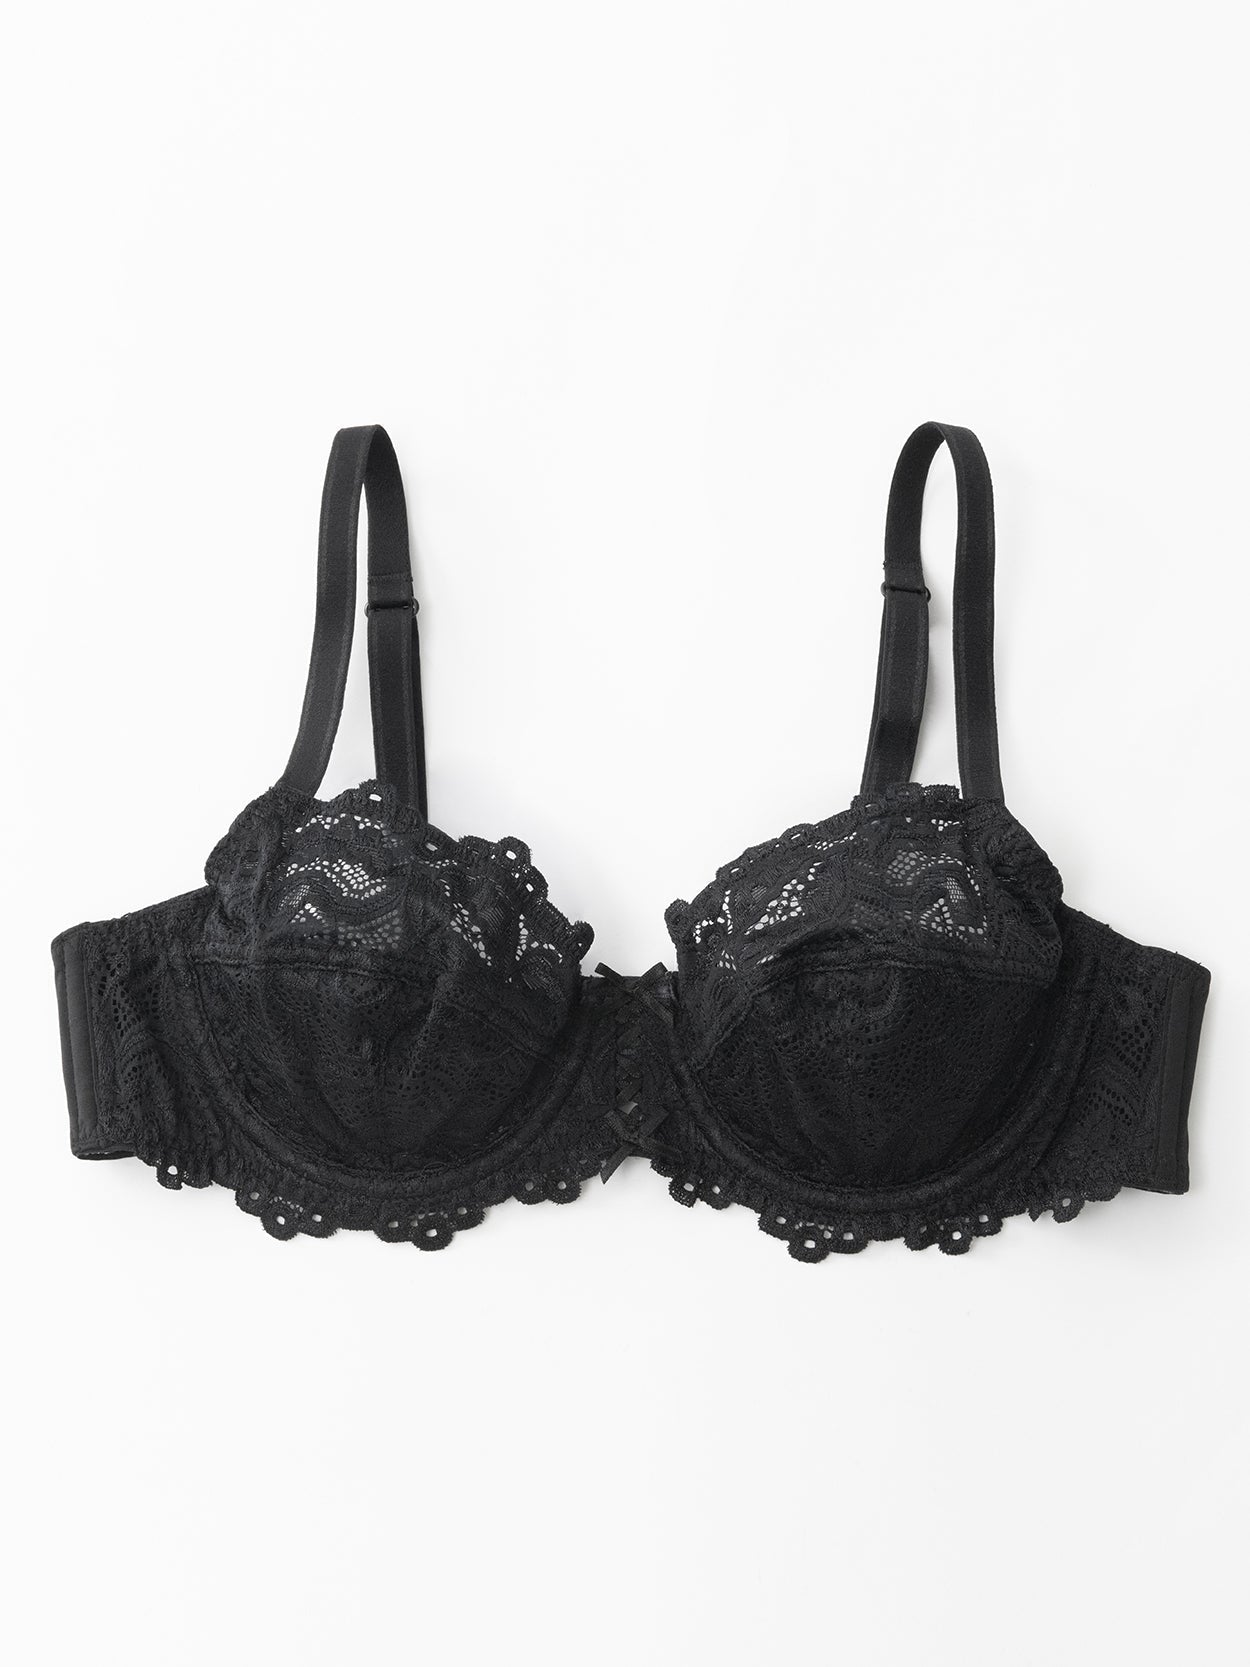 Floral Plus Size Lace Push Up Bra With Full Coverage, Underwire, Non Padded  Lace, And Unlined Design Perfect Lingerie For Women In 40DD 50DDD270n From  Iklpz, $22.63